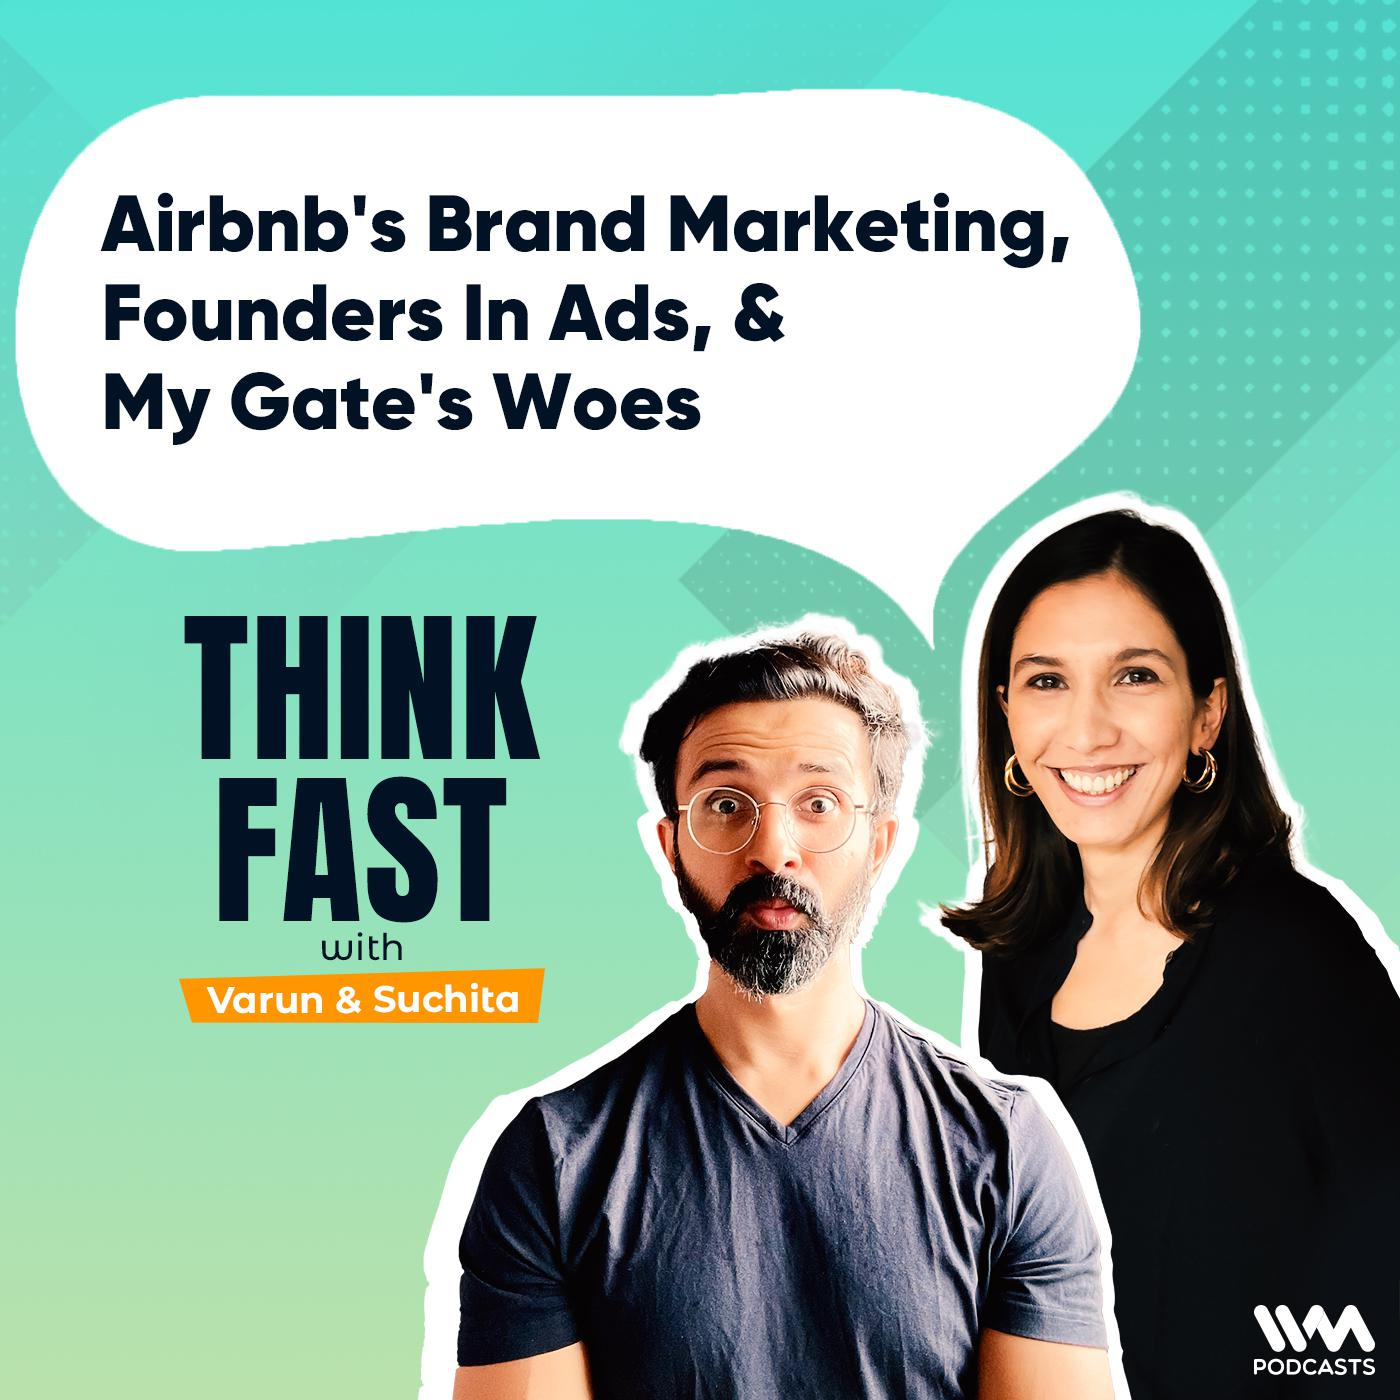 Airbnb's Brand Marketing, Founders In Ads, & My Gate's Woes